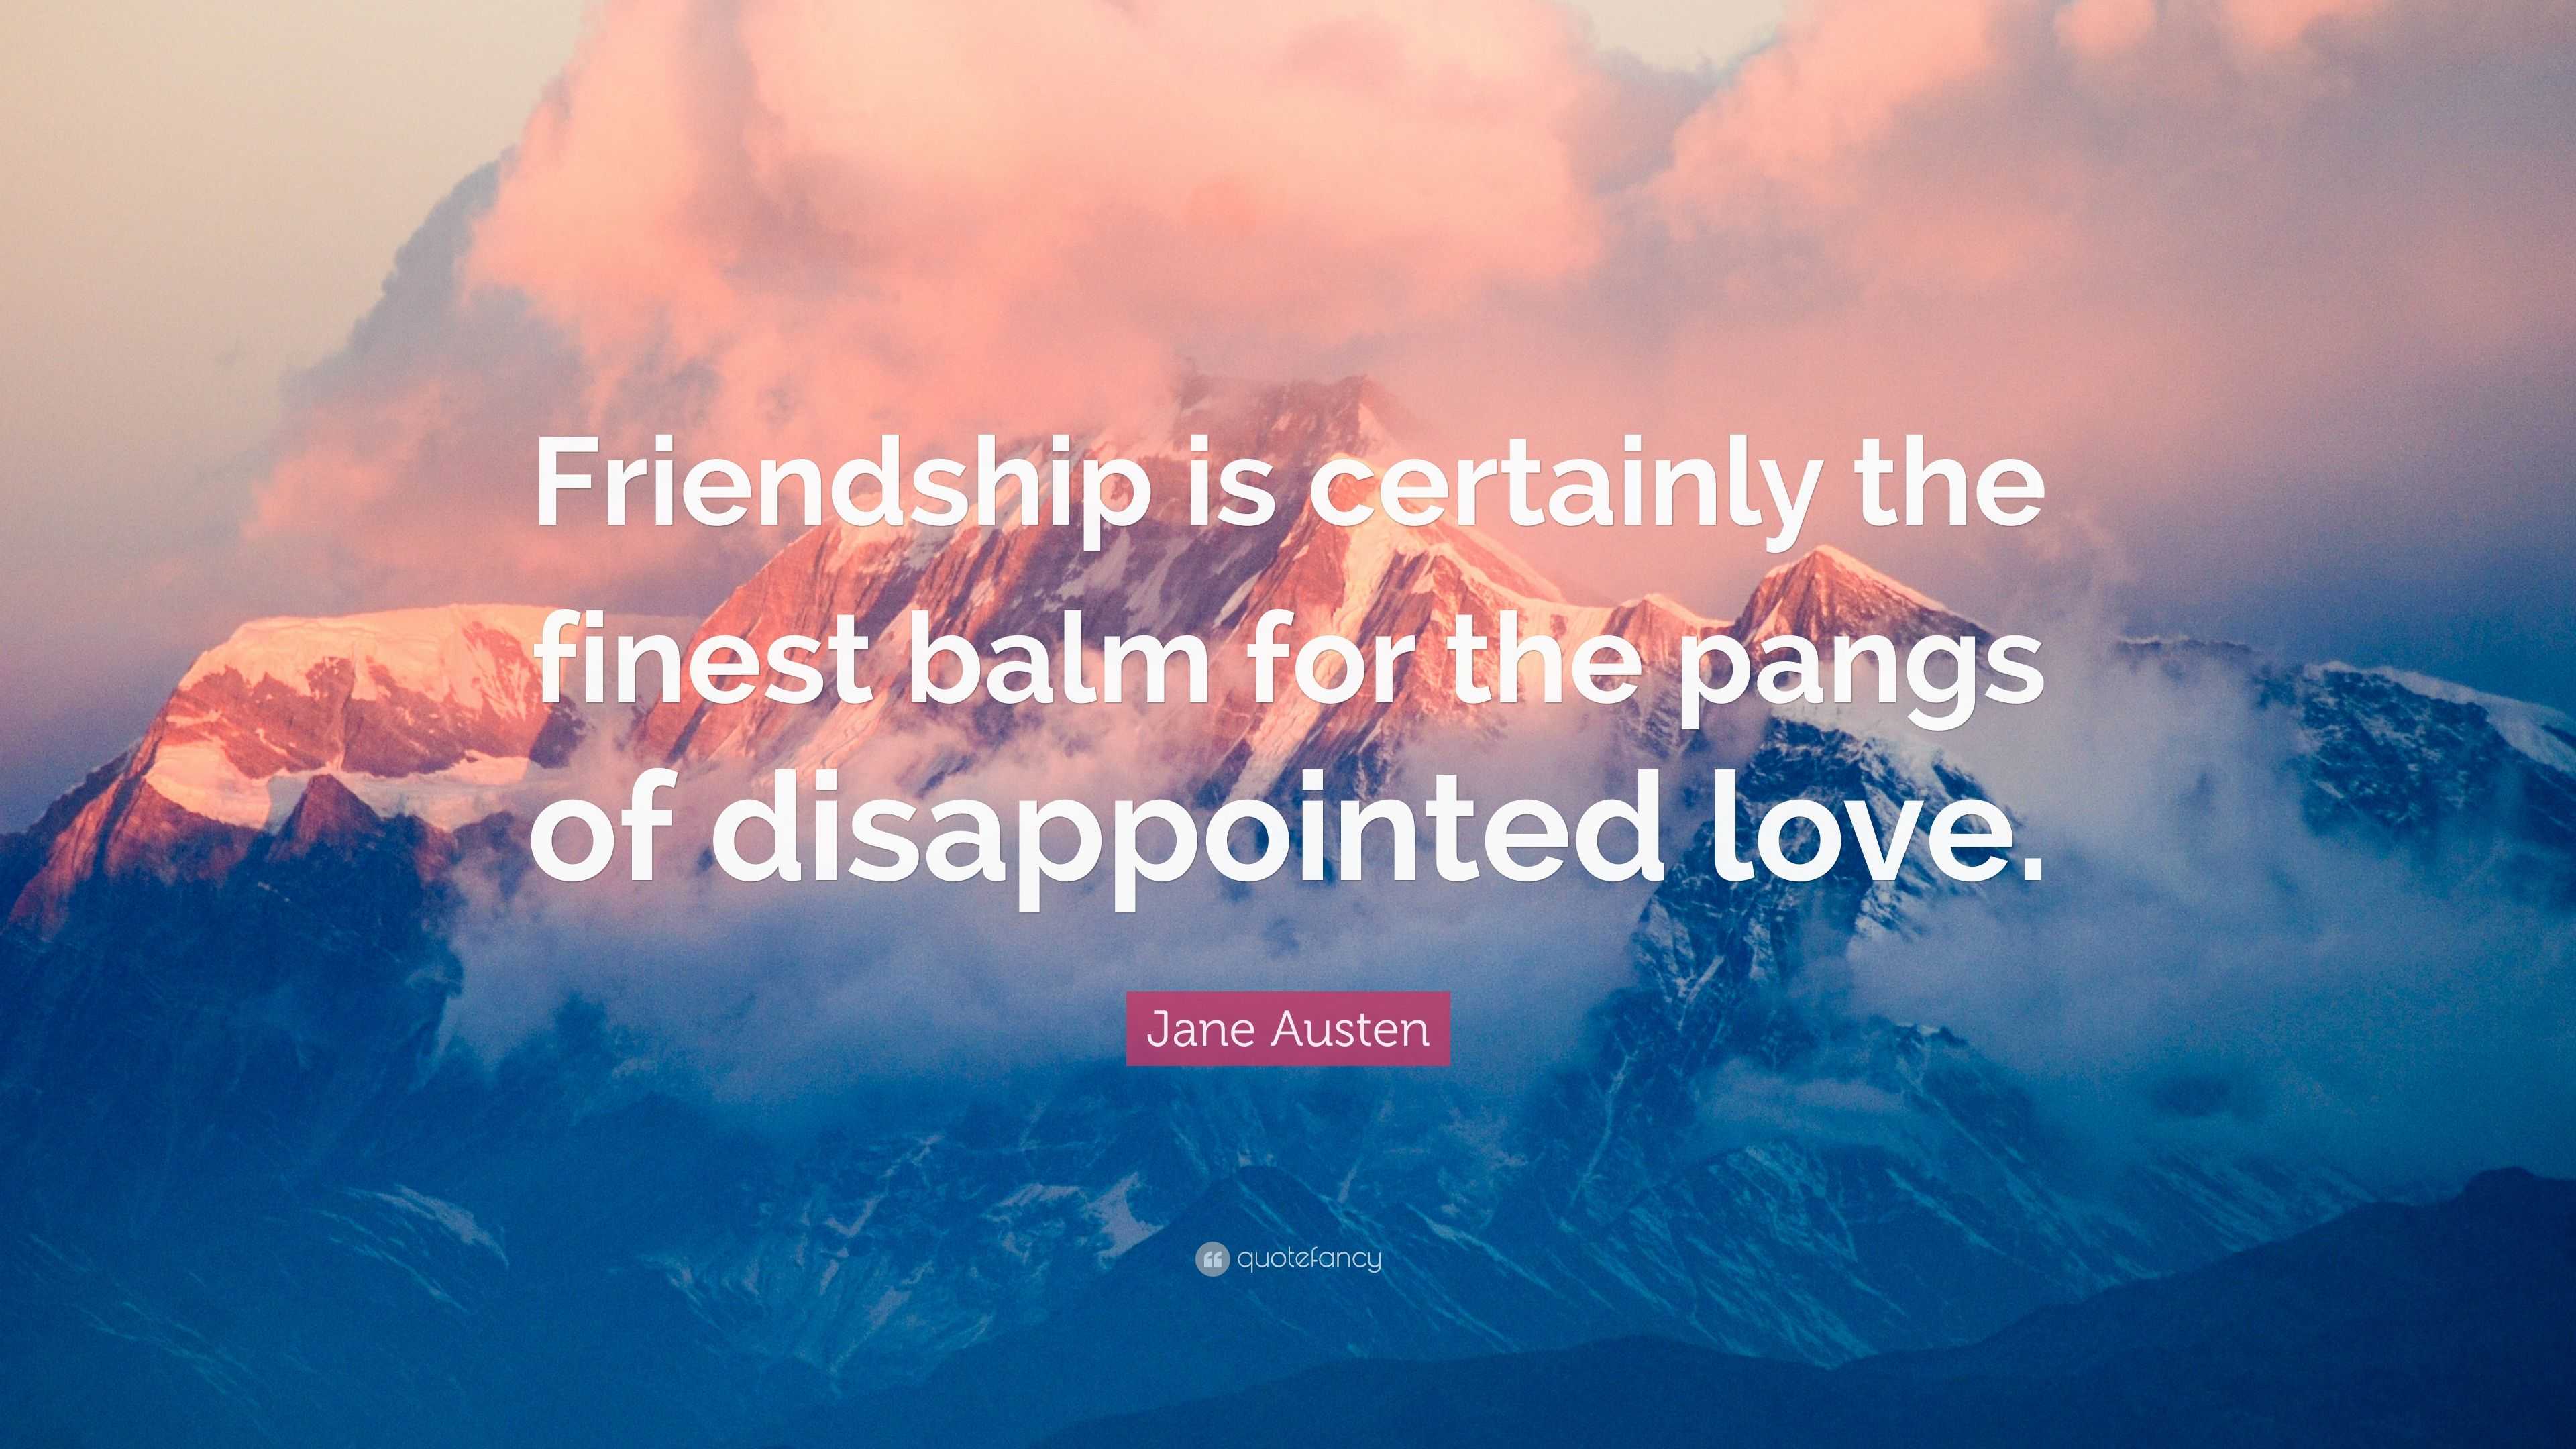 Jane Austen Quote “Friendship is certainly the finest balm for the pangs of disappointed